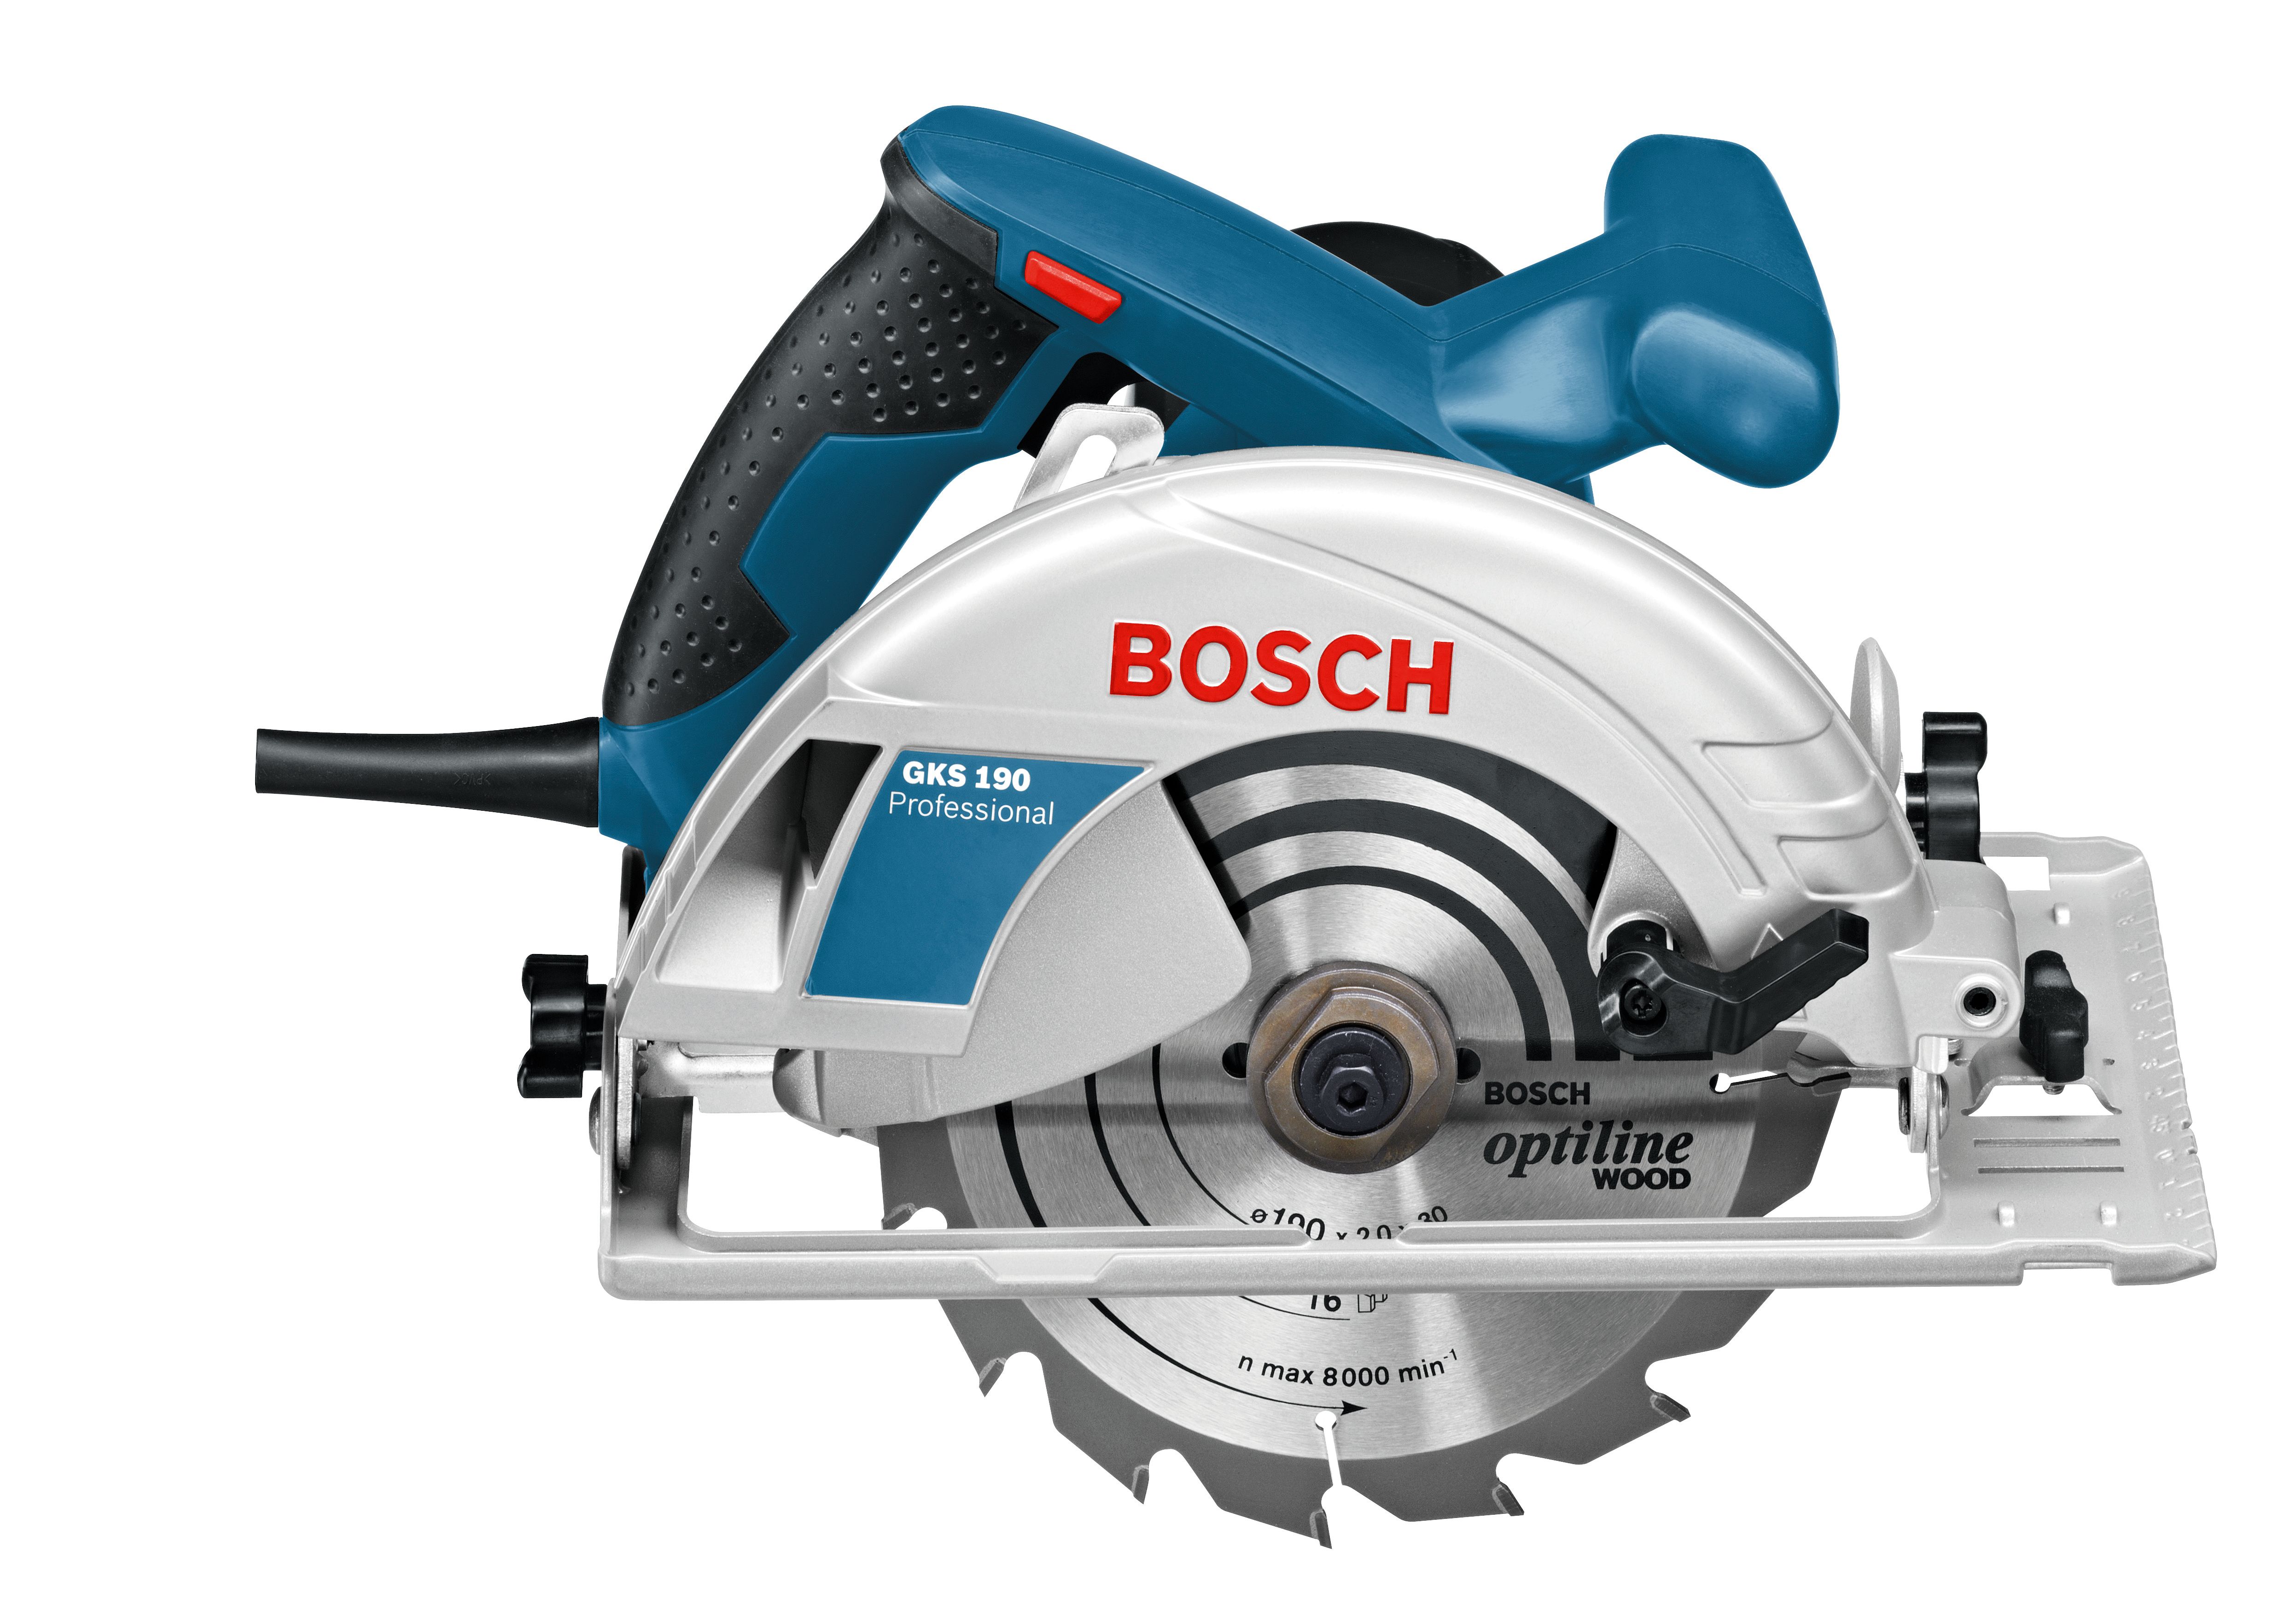 Image of Bosch Professional GKS 190 190mm Circular Saw - 1400W Corded